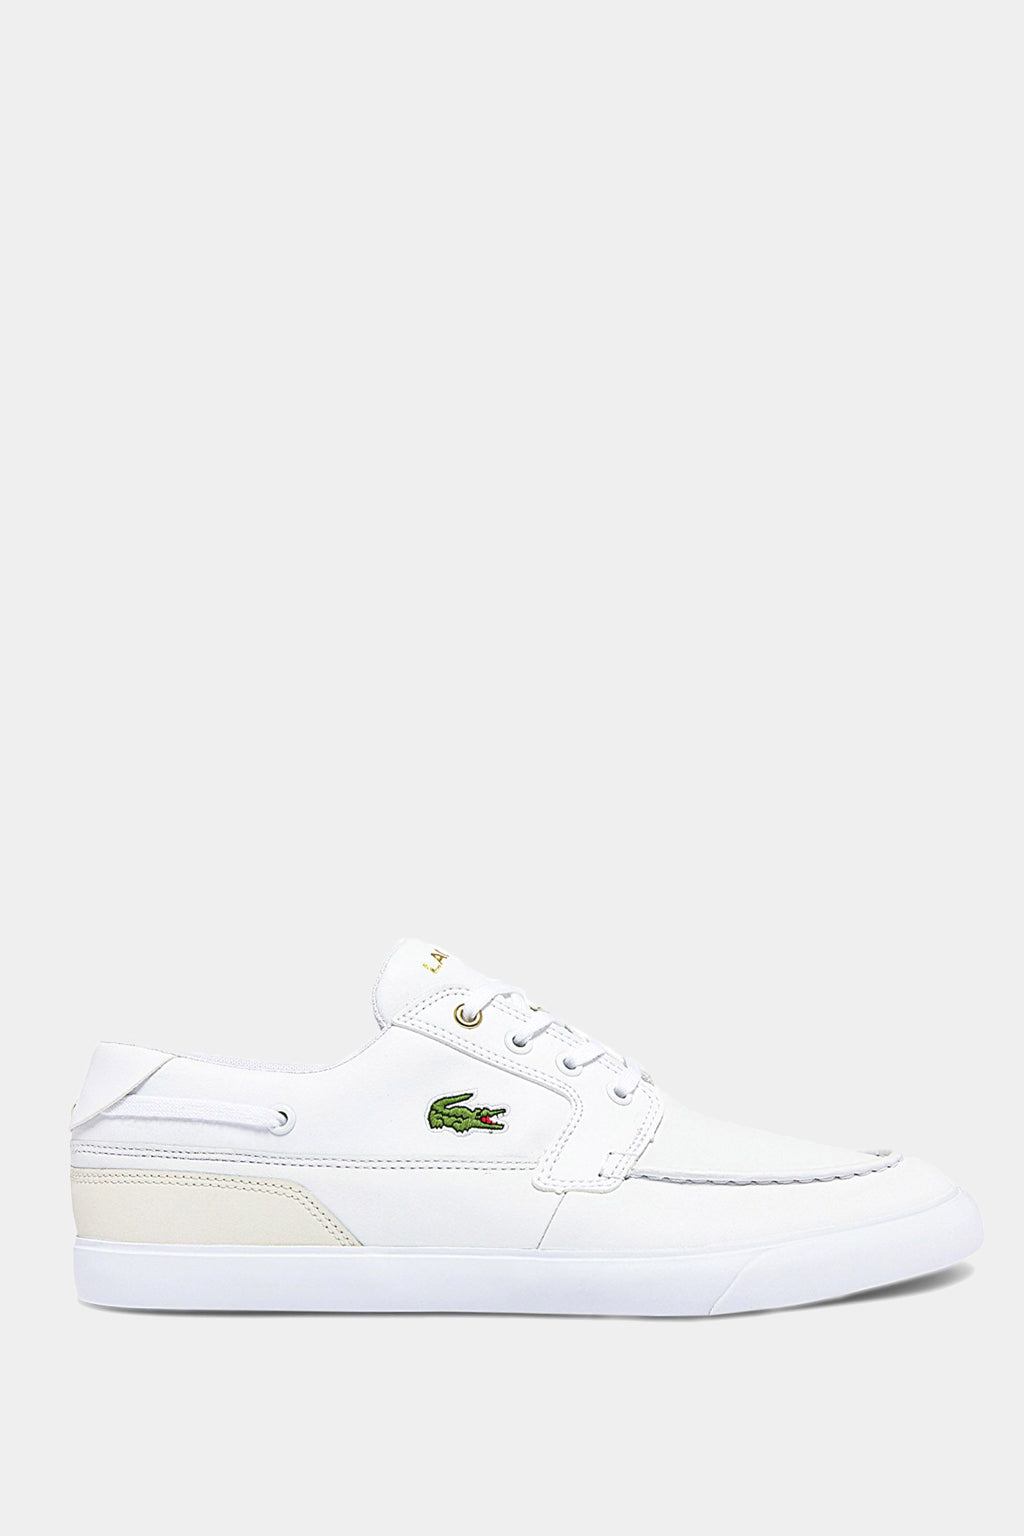 Lacoste - Bayliss Deck Trainers